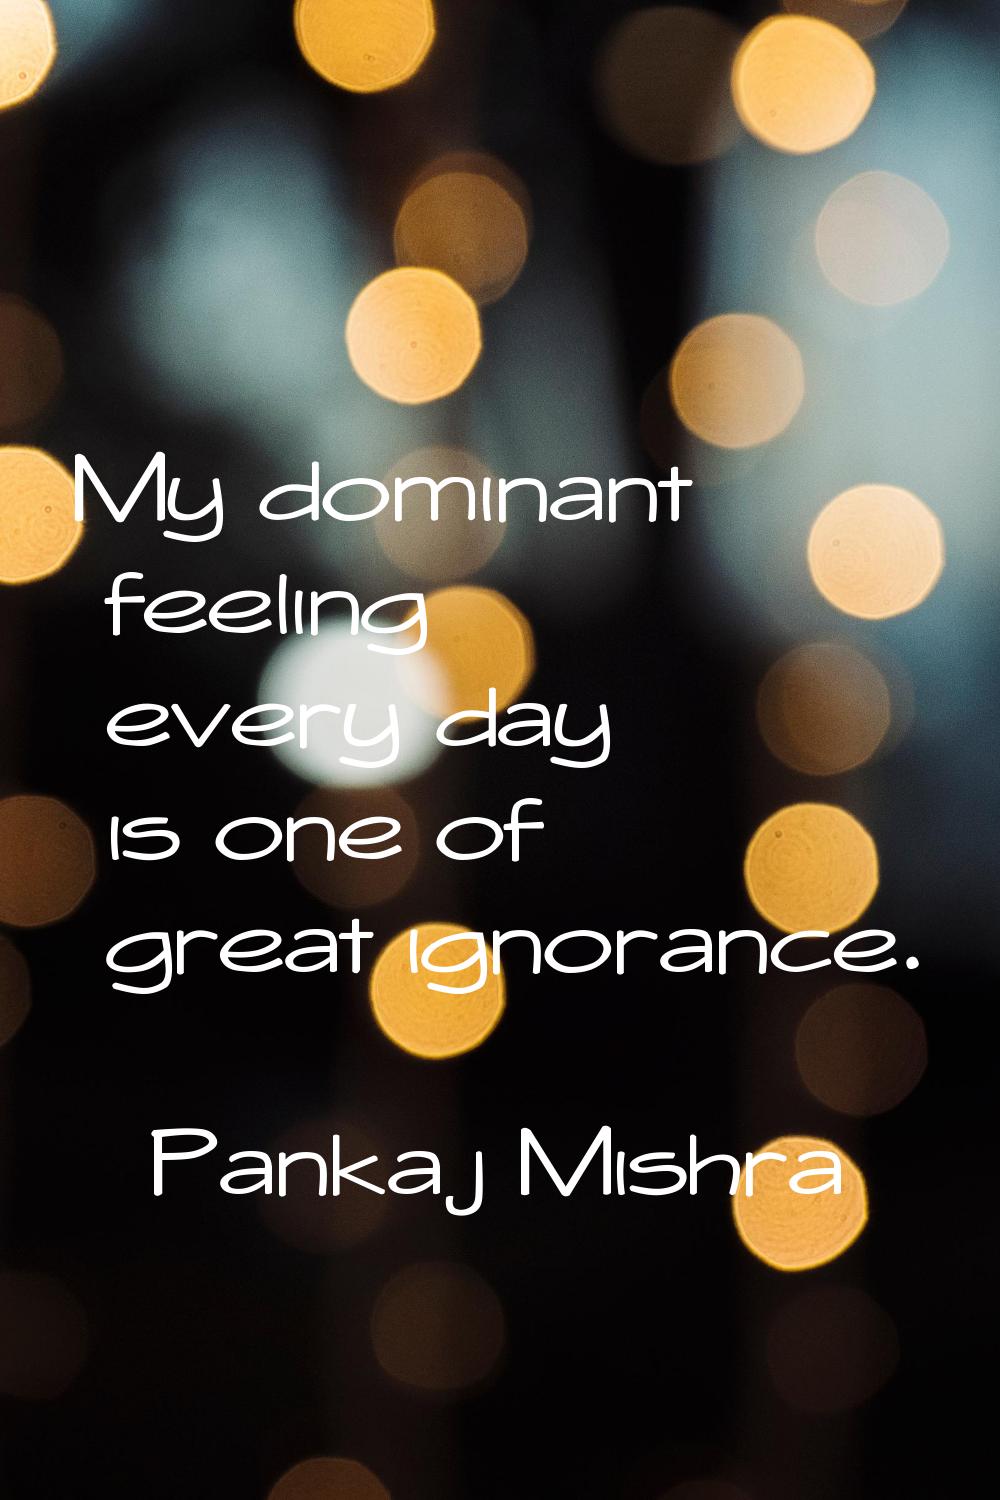 My dominant feeling every day is one of great ignorance.